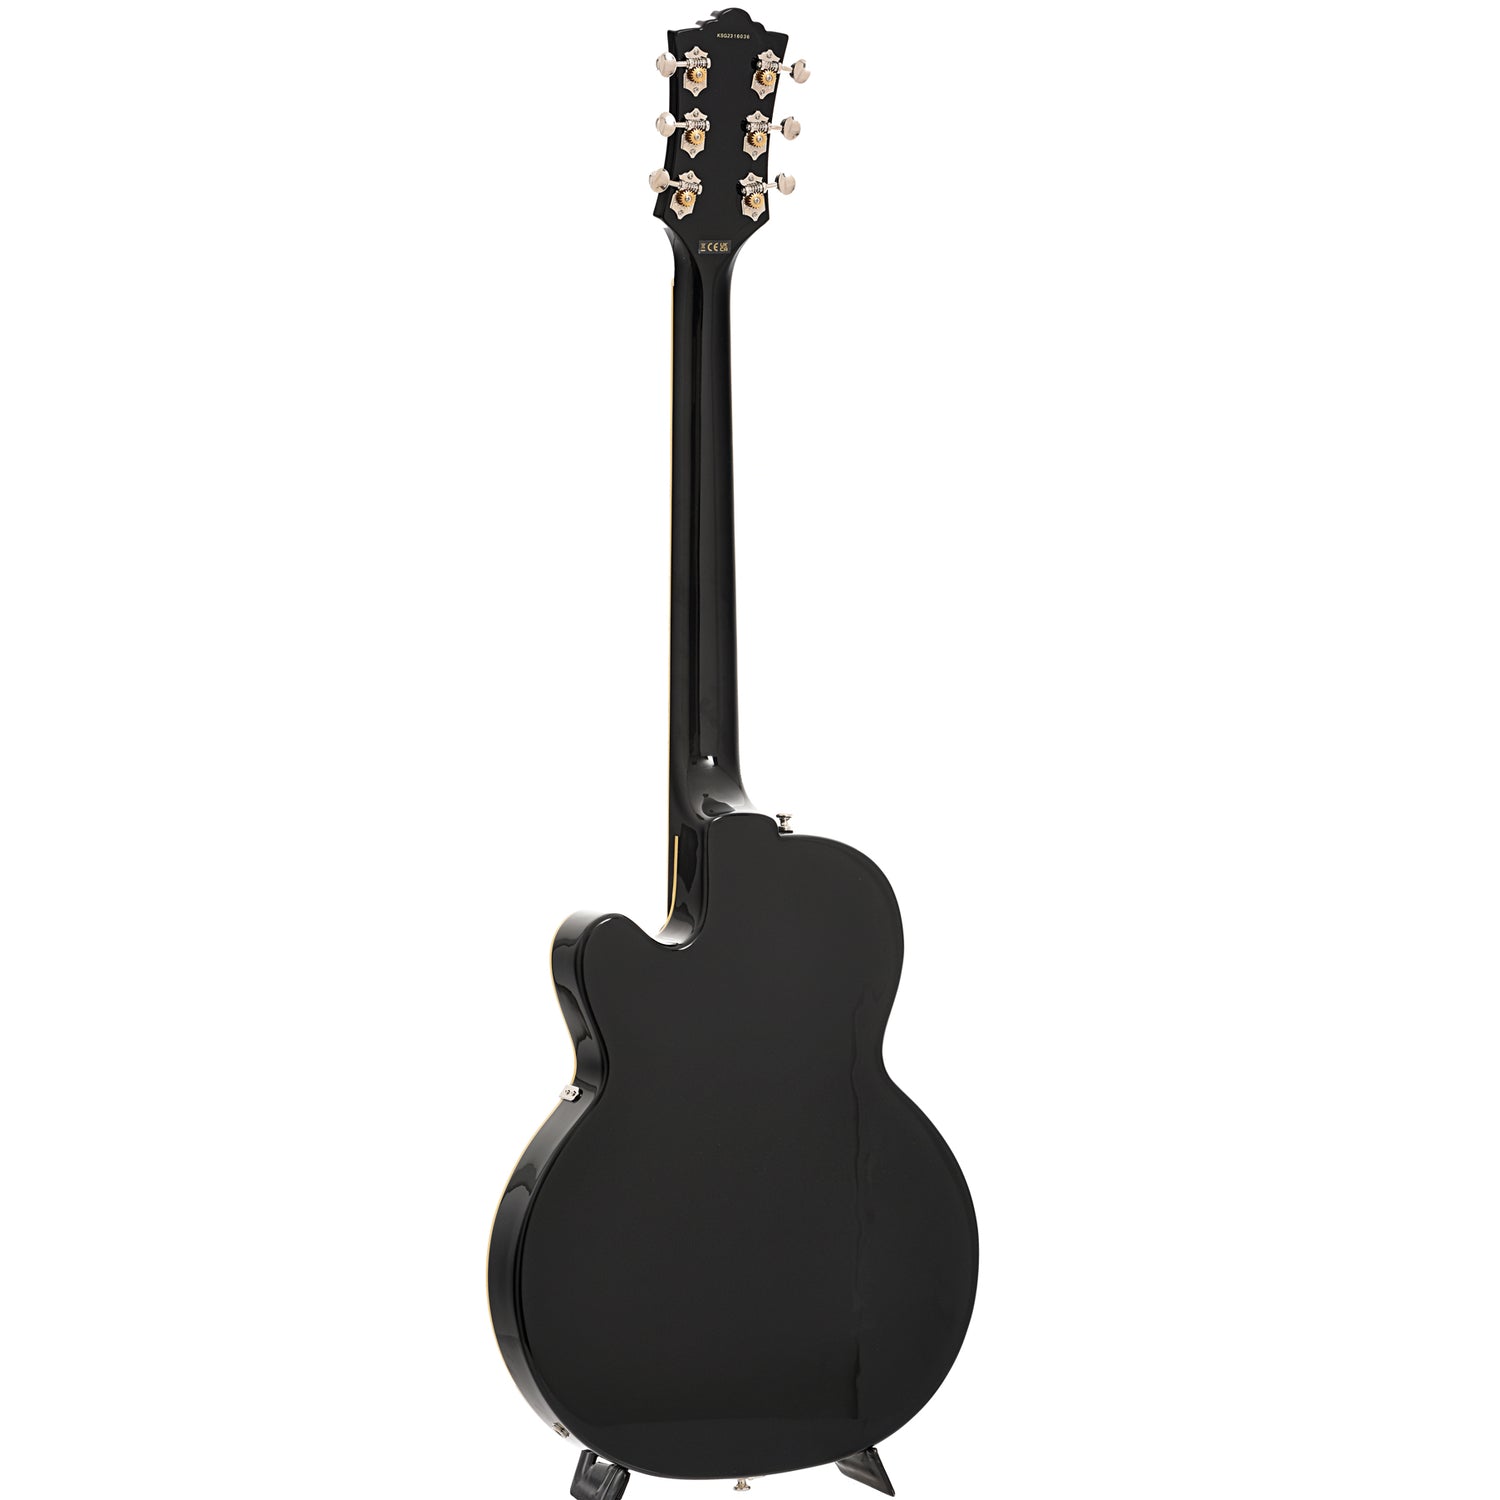 Full back and side of Guild Newark St. Collection M-75 Aristocrat Hollow Body Archtop Guitar, Limited Edition Black Finish